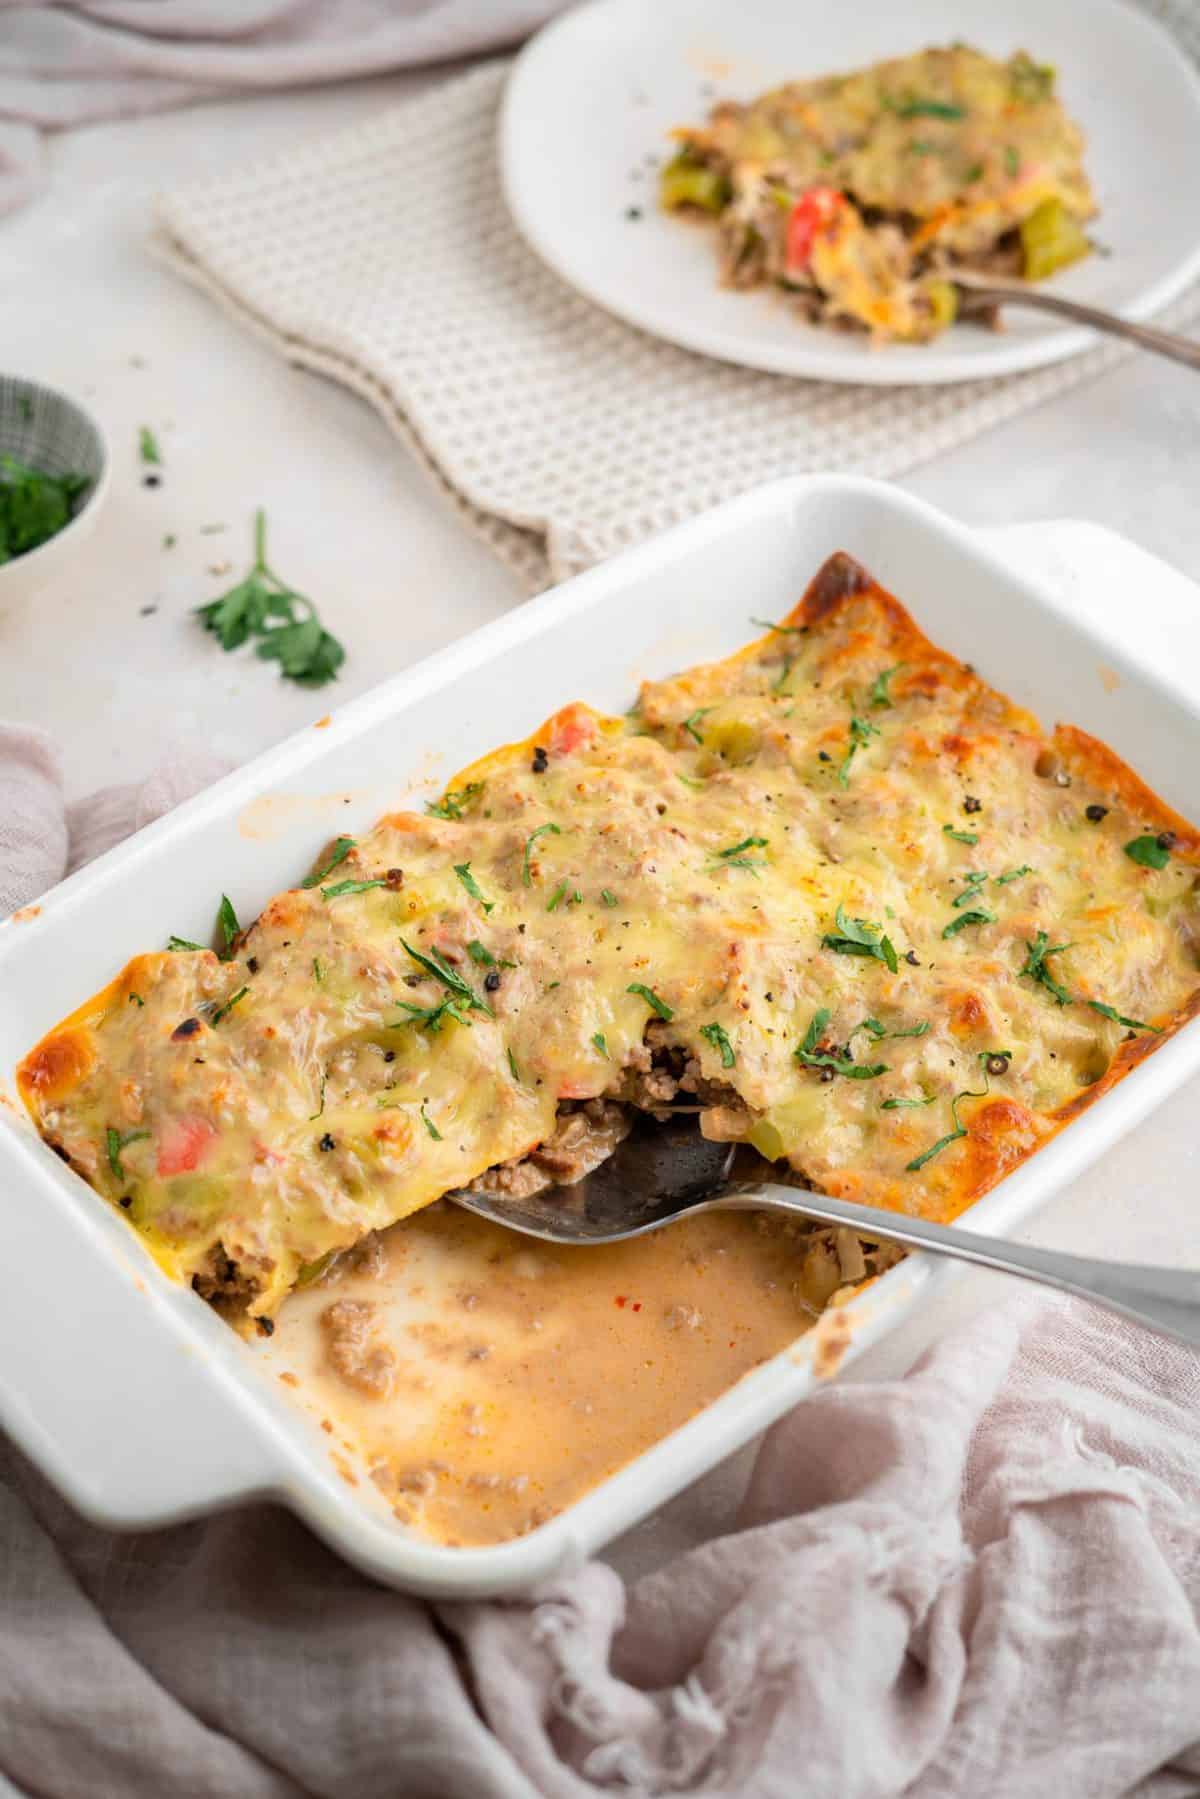 Philly Cheesesteak Casserole Recipe - KetoConnect